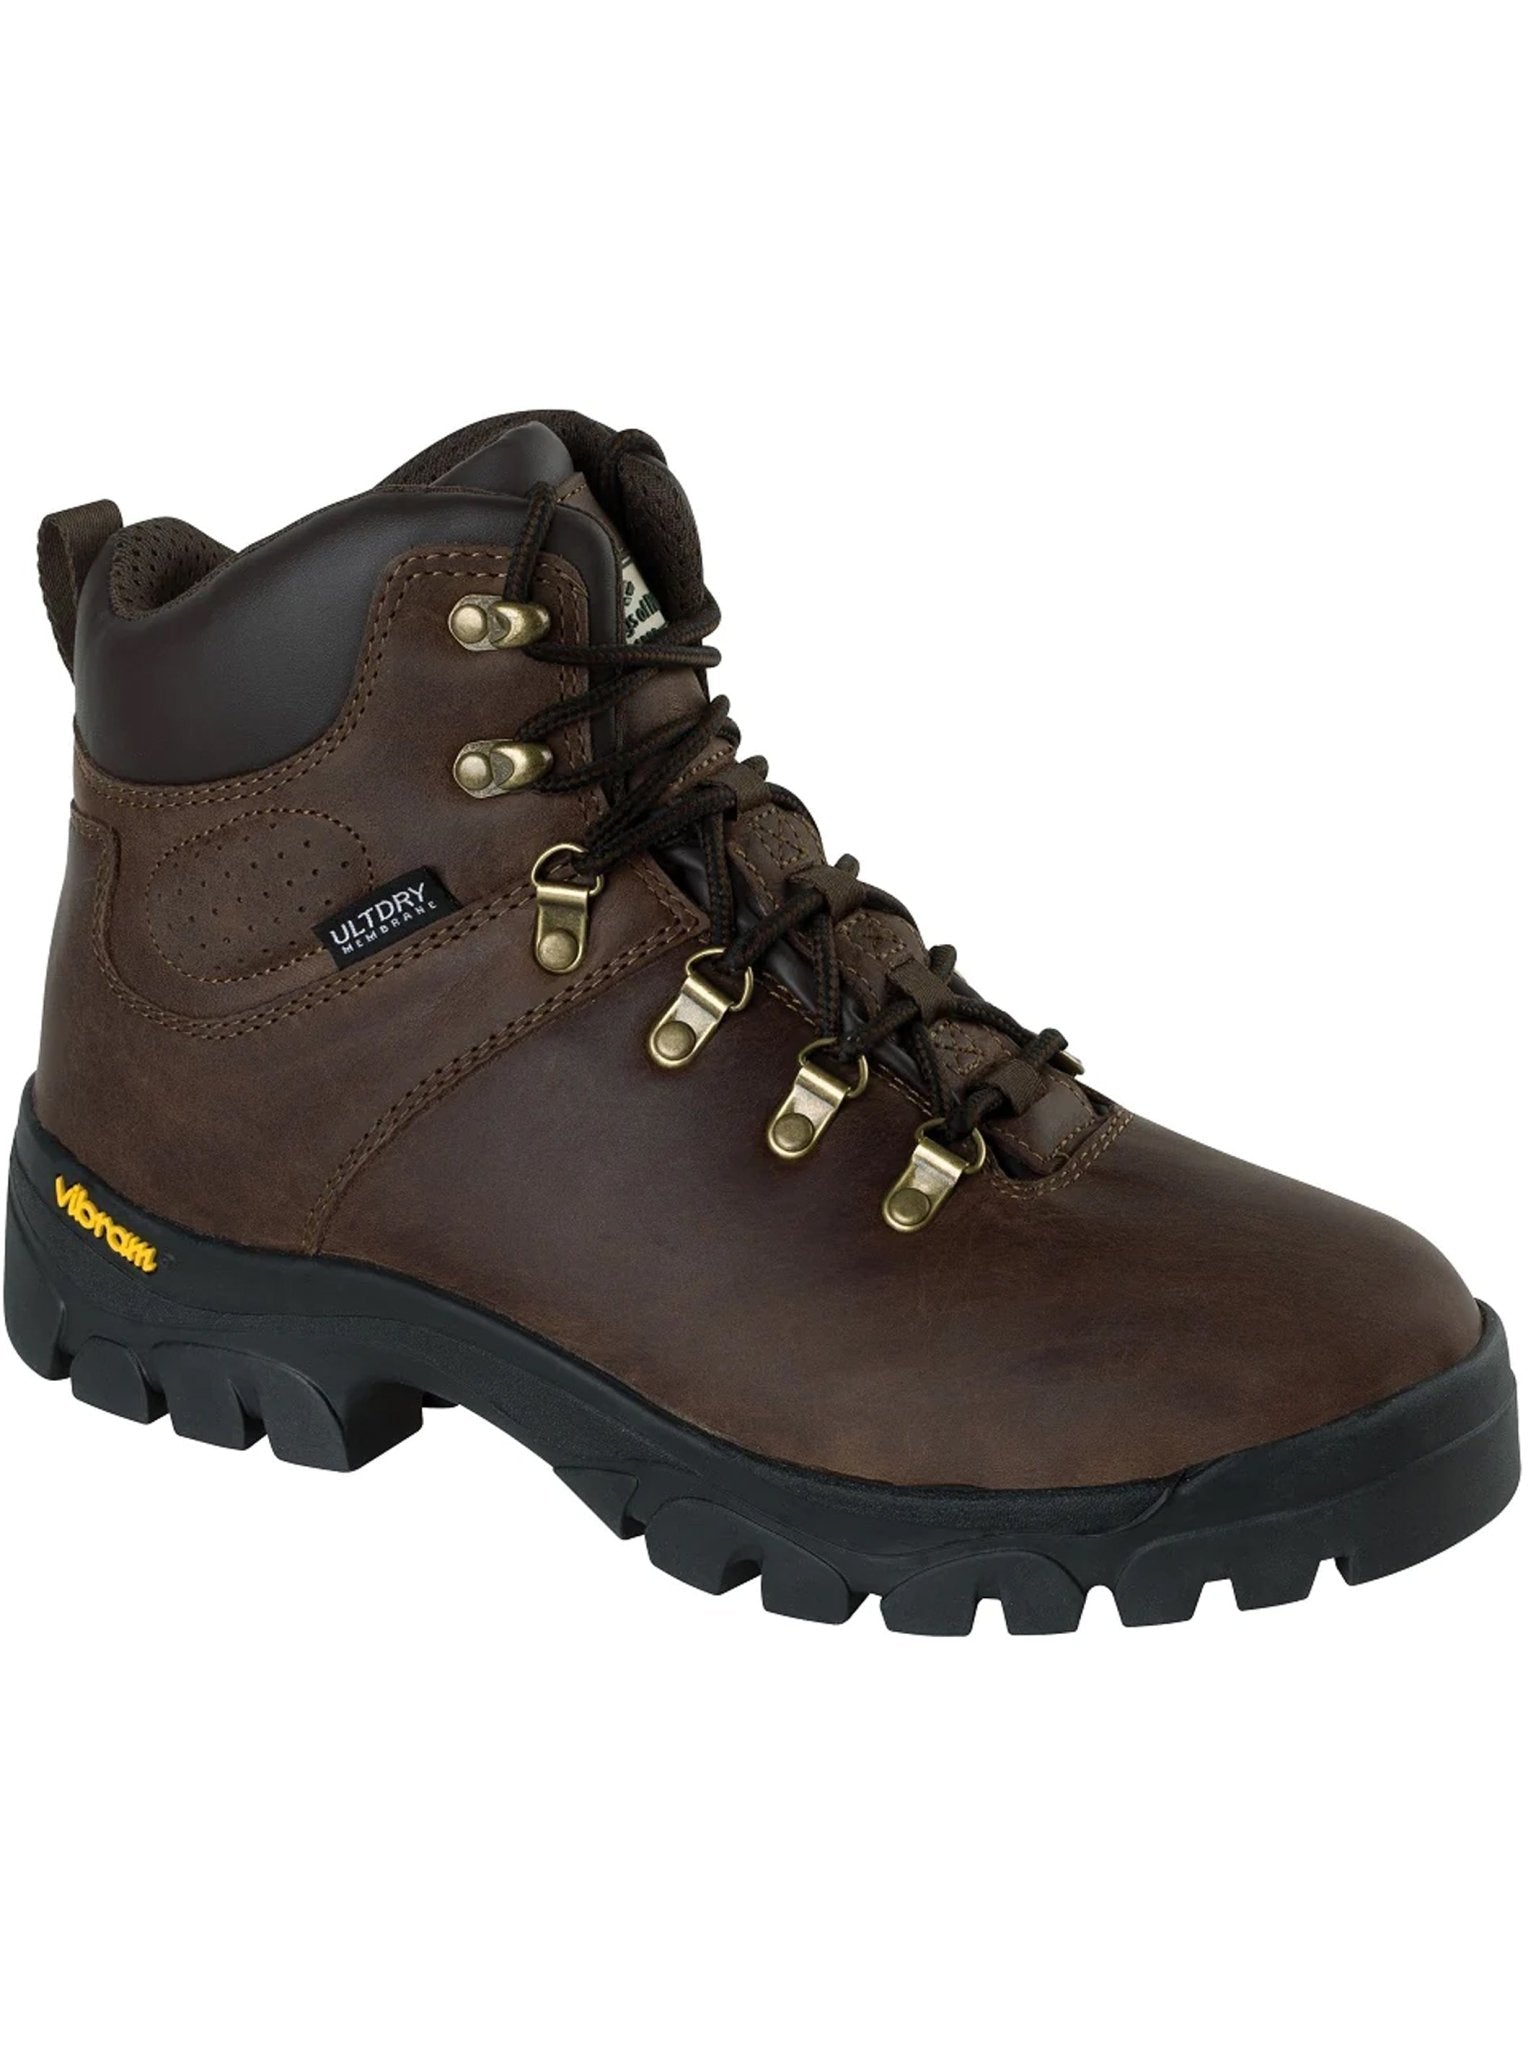 Hoggs of Fife Hoggs Of Fife - Waterproof Hiking / mens walking Boot - Munro Leather boot Boots